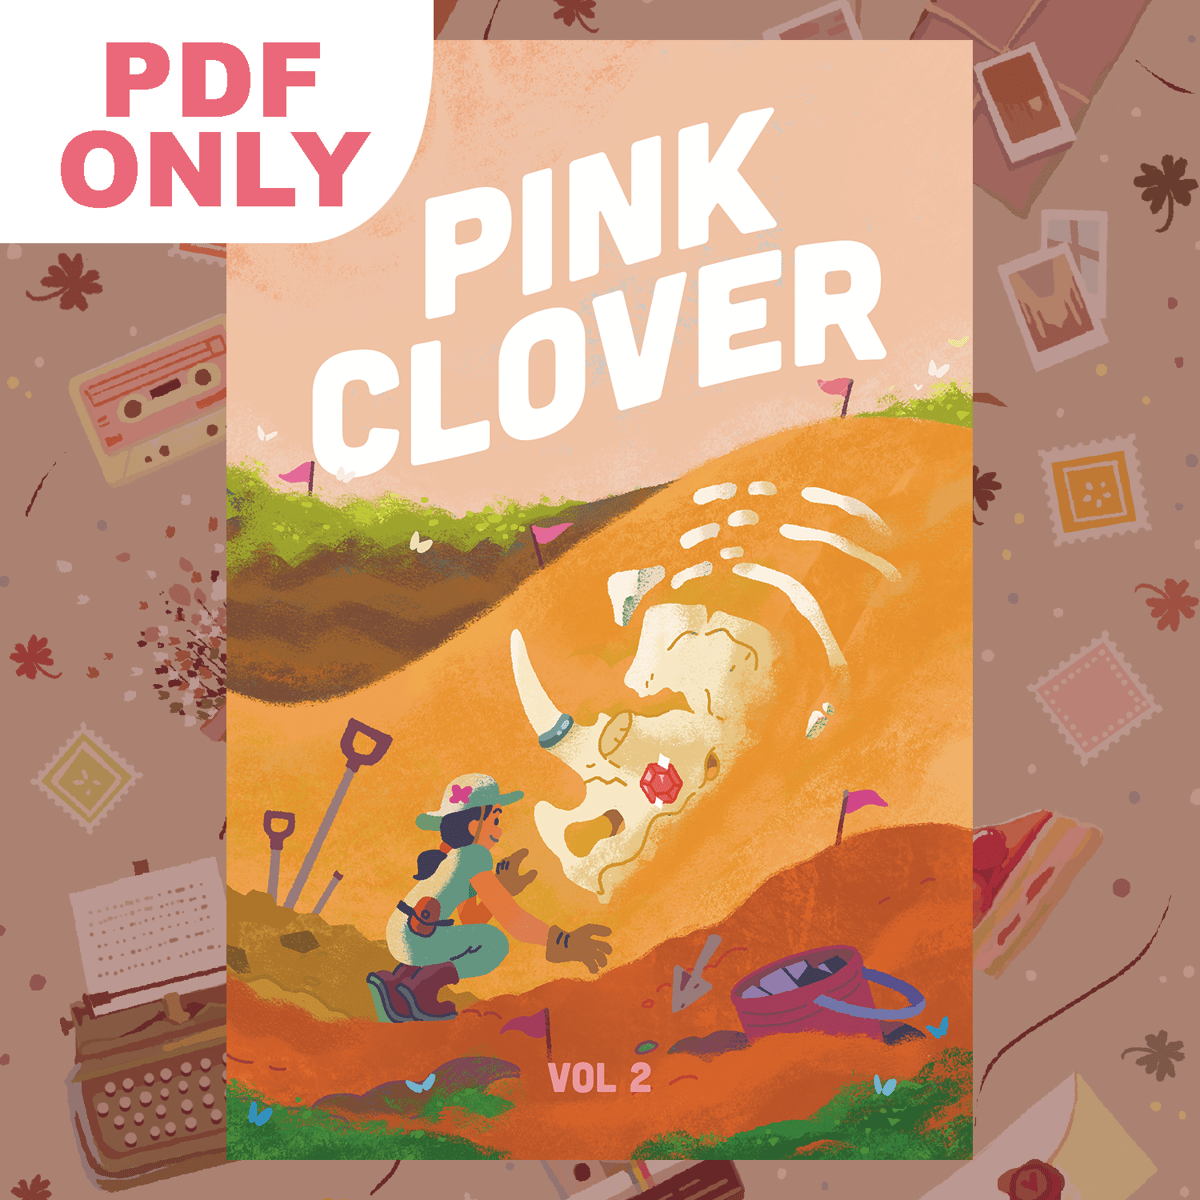 Image of Pink Clover Magazine Vol 2: Getting Connected PDF